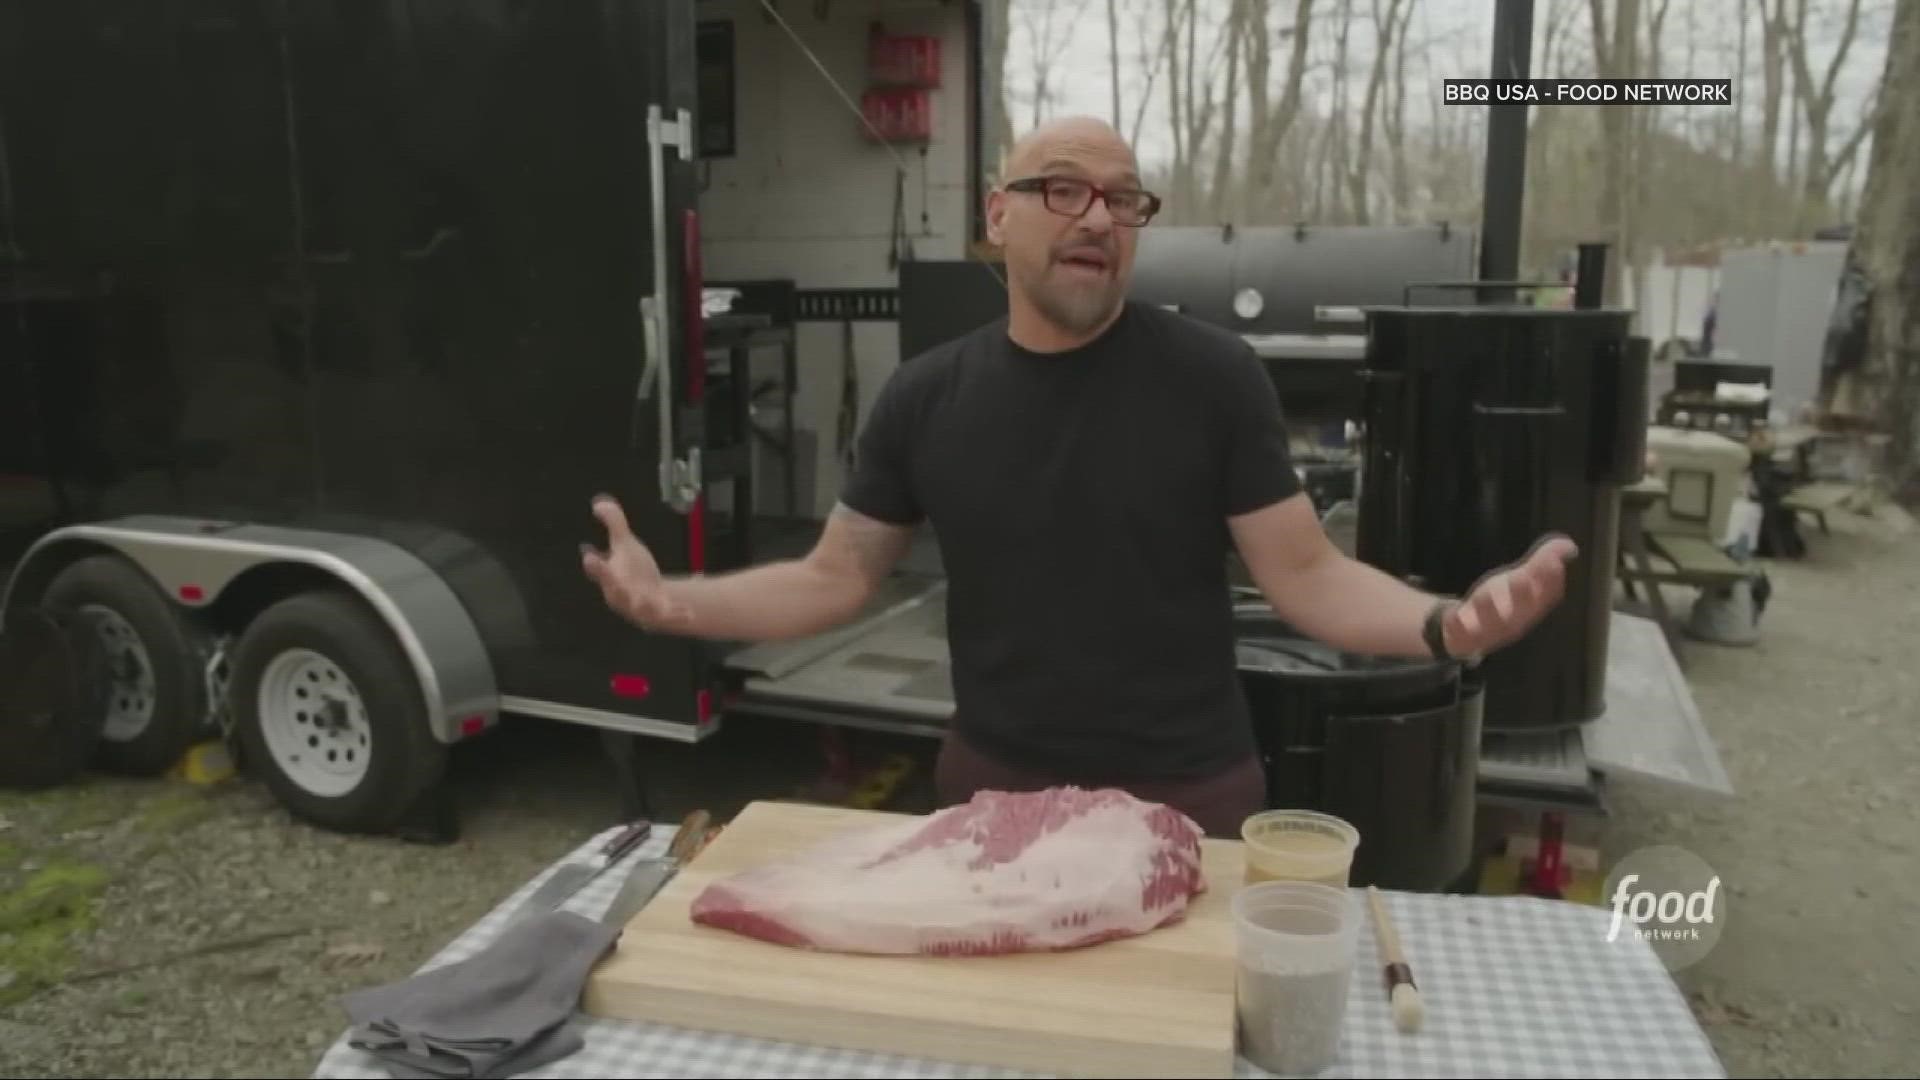 Taking to Twitter, Michael Symon revealed that the second season of 'BBQ USA' is currently filming in Cleveland.